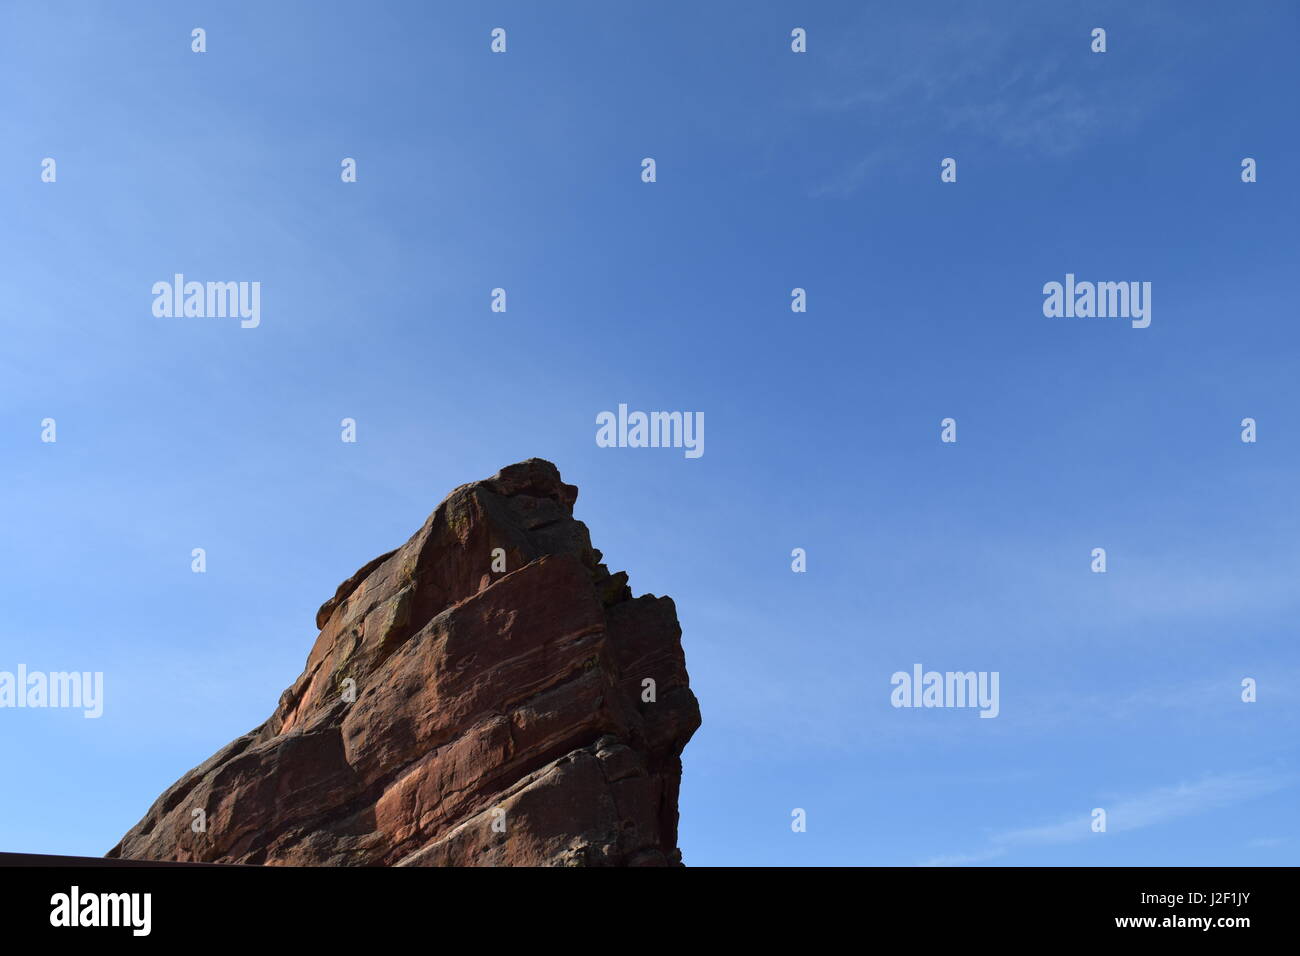 A glimpse of the peak of a red rock from the Red Rocks Amphitheater. Stock Photo